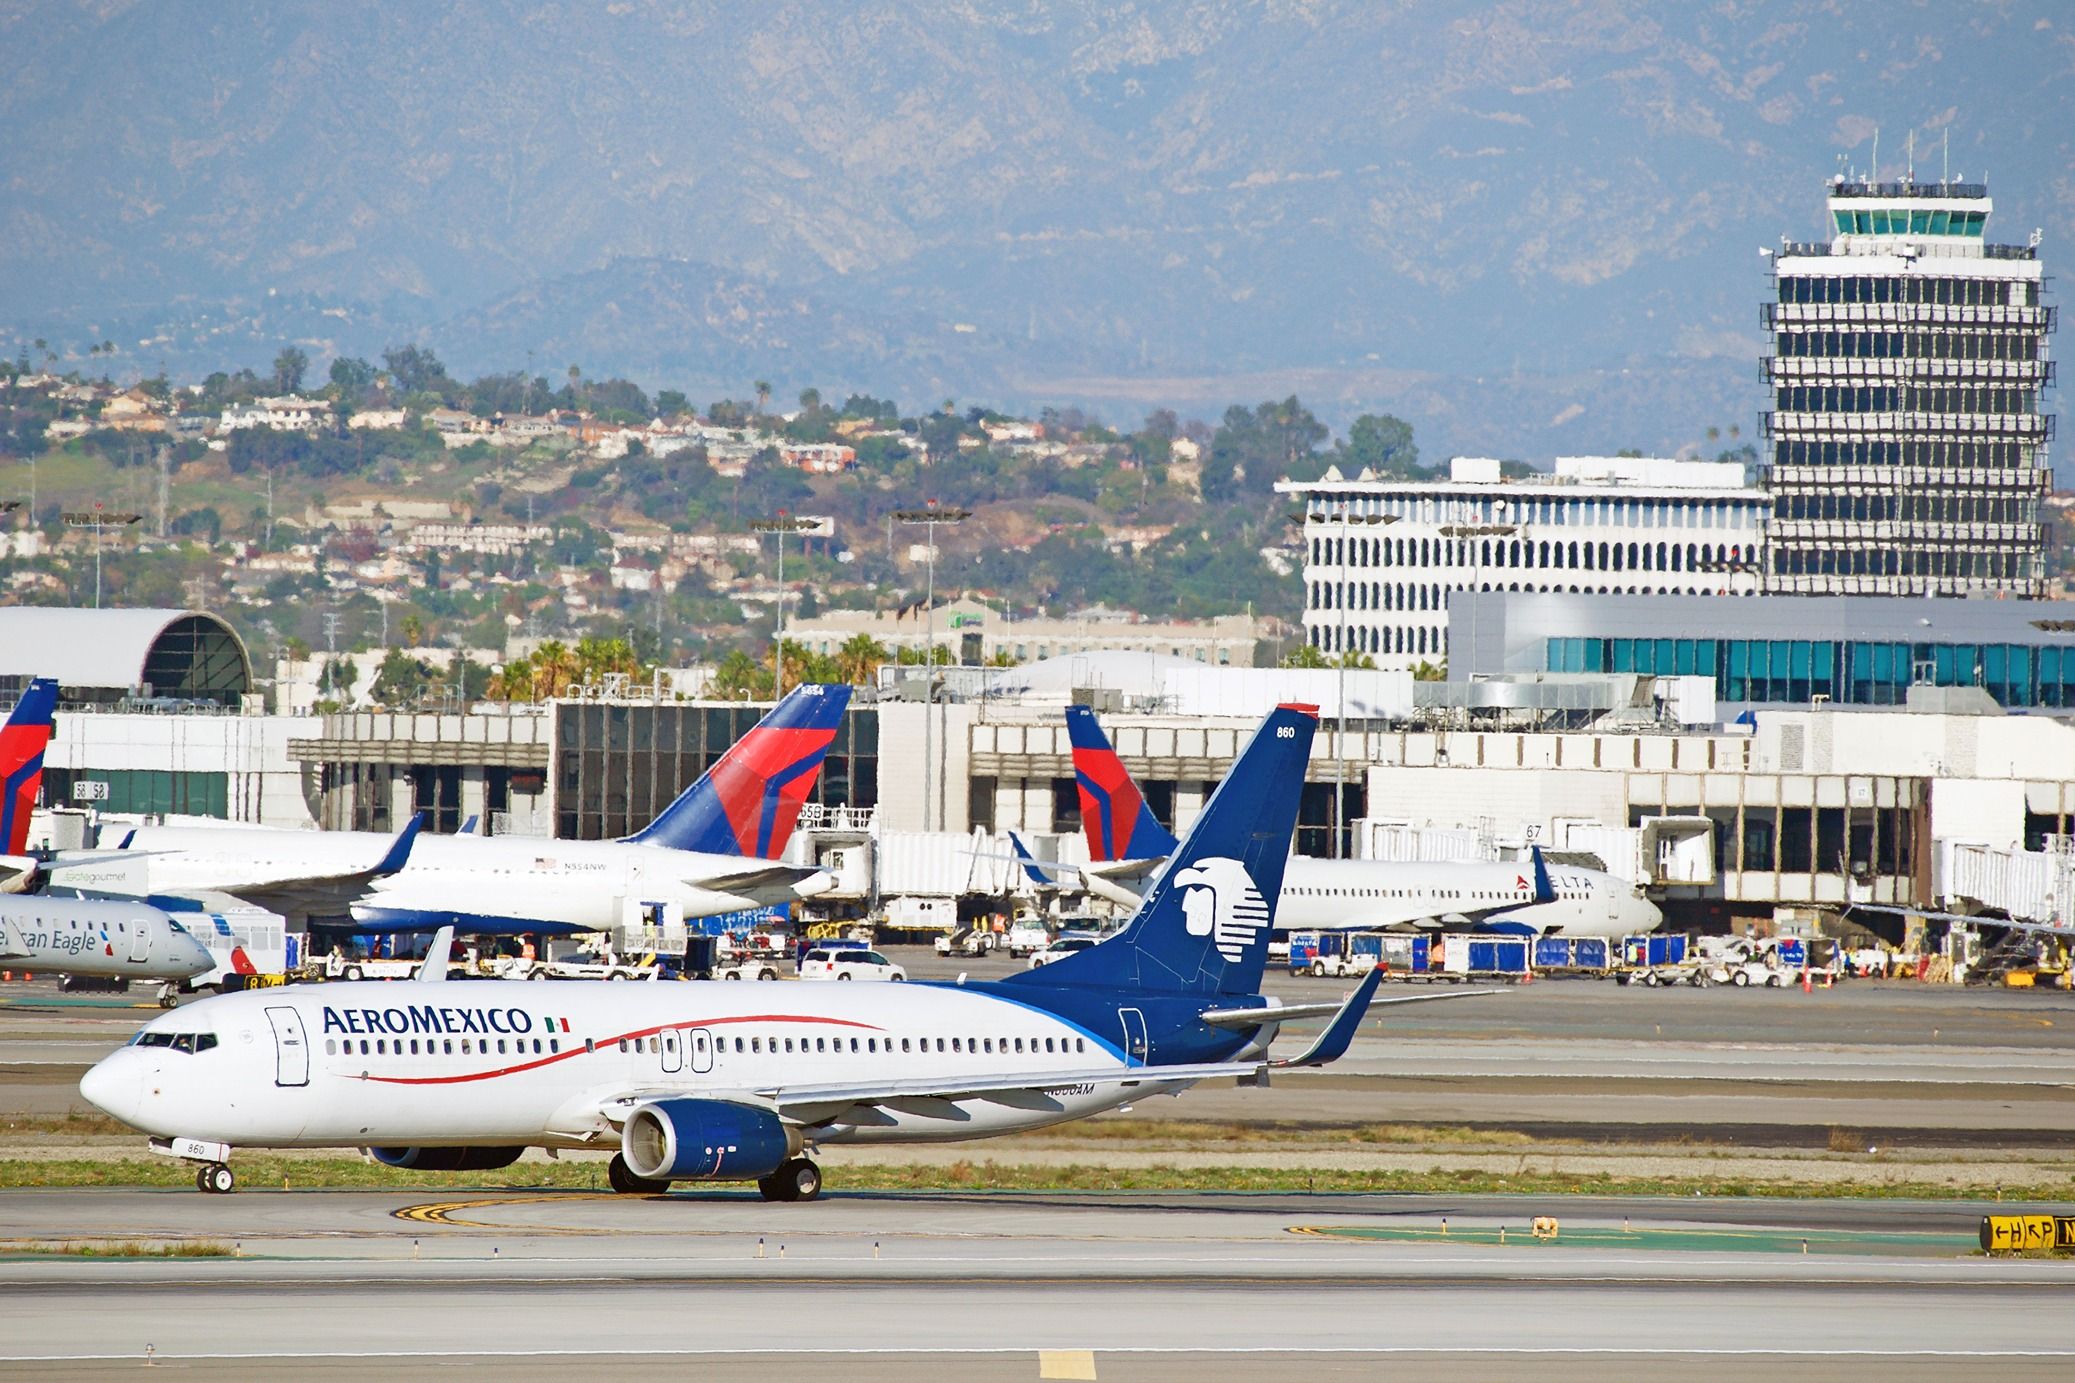 Aeromexico Boeing 737 and Delta Air Lines aircraft shutterstock_538733074